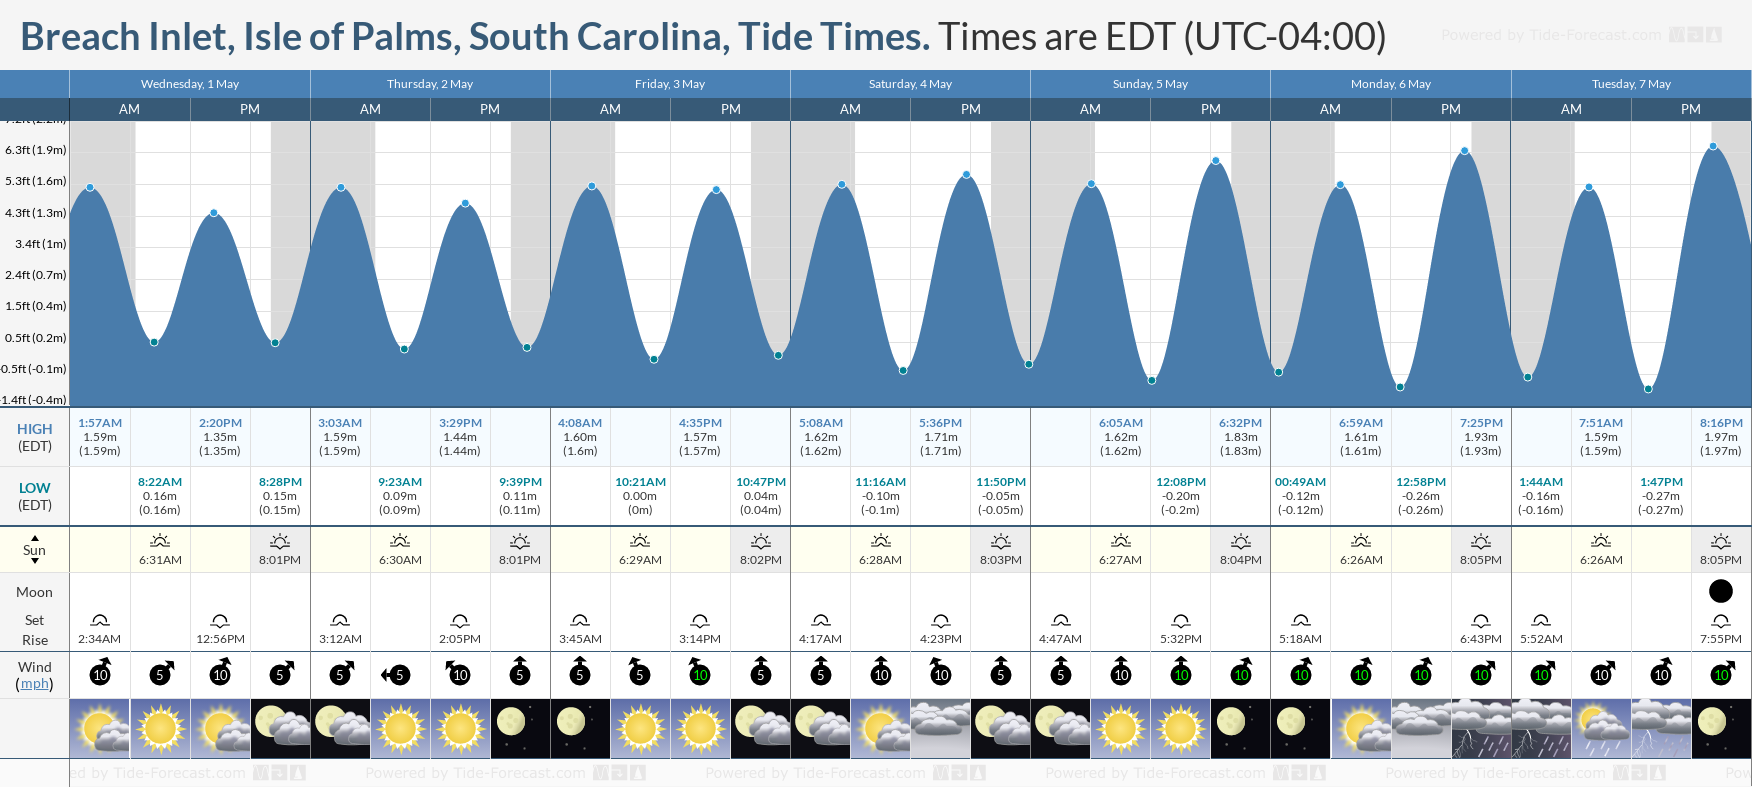 Breach Inlet, Isle of Palms, South Carolina Tide Chart including high and low tide tide times for the next 7 days